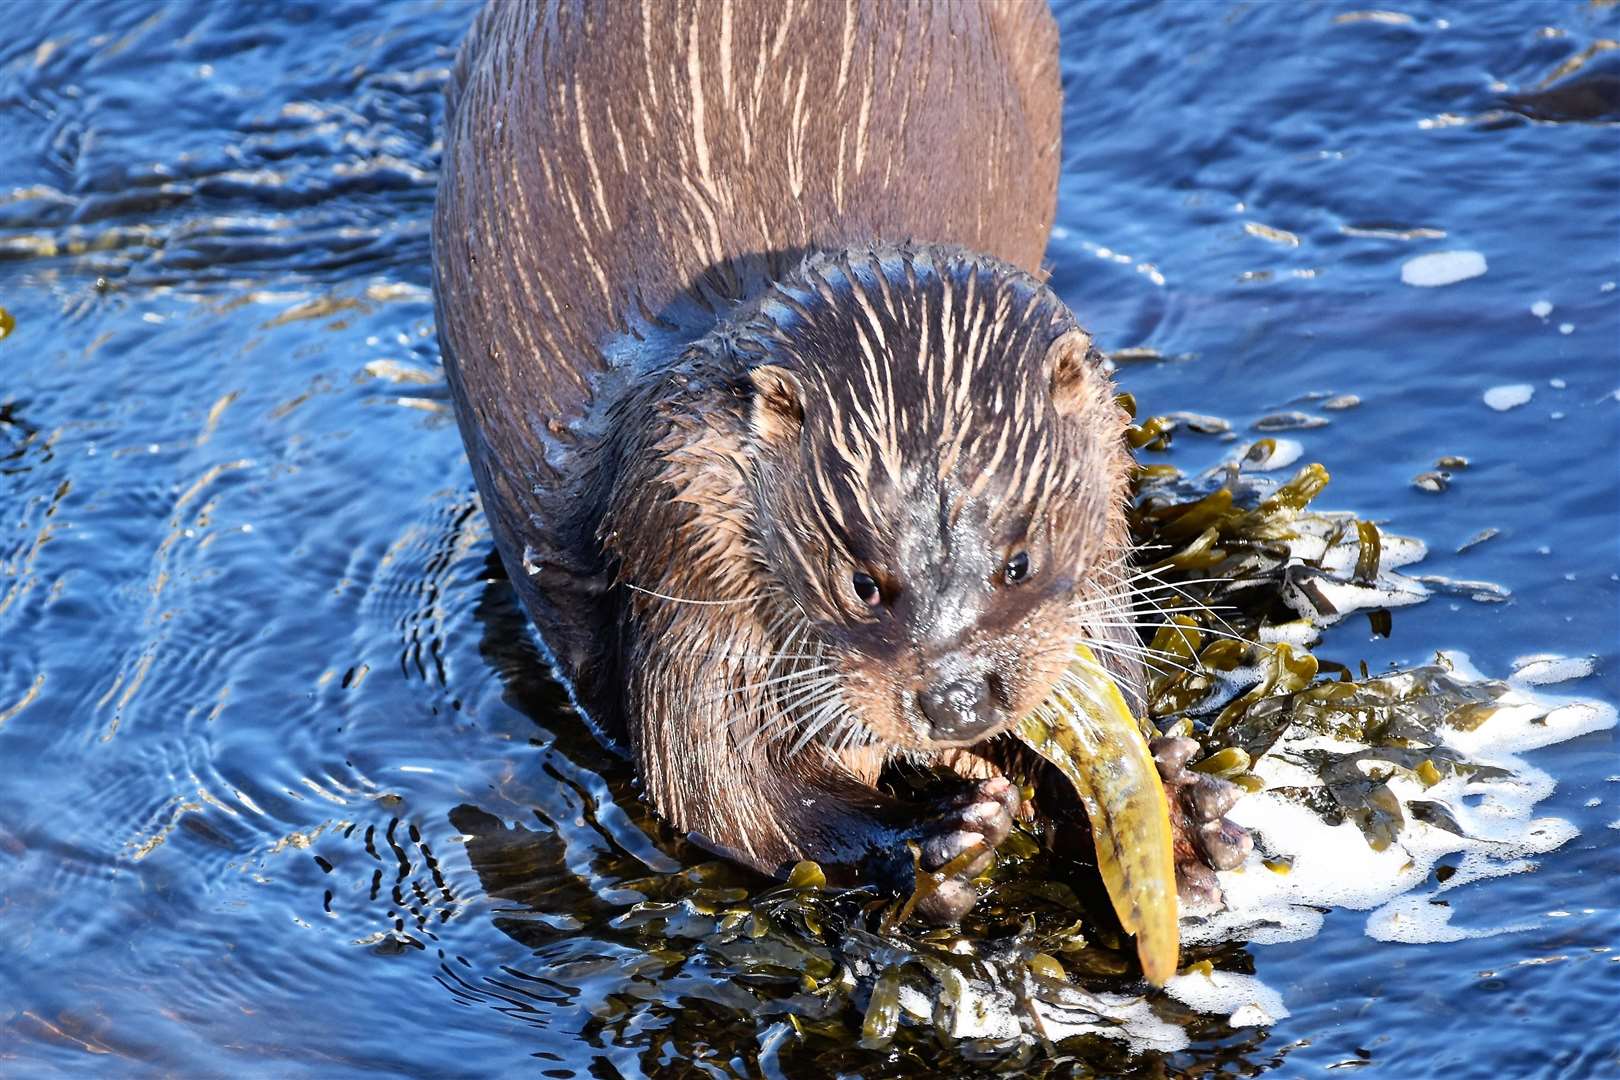 An otter captured on the Wick River by Noel Donaldson.